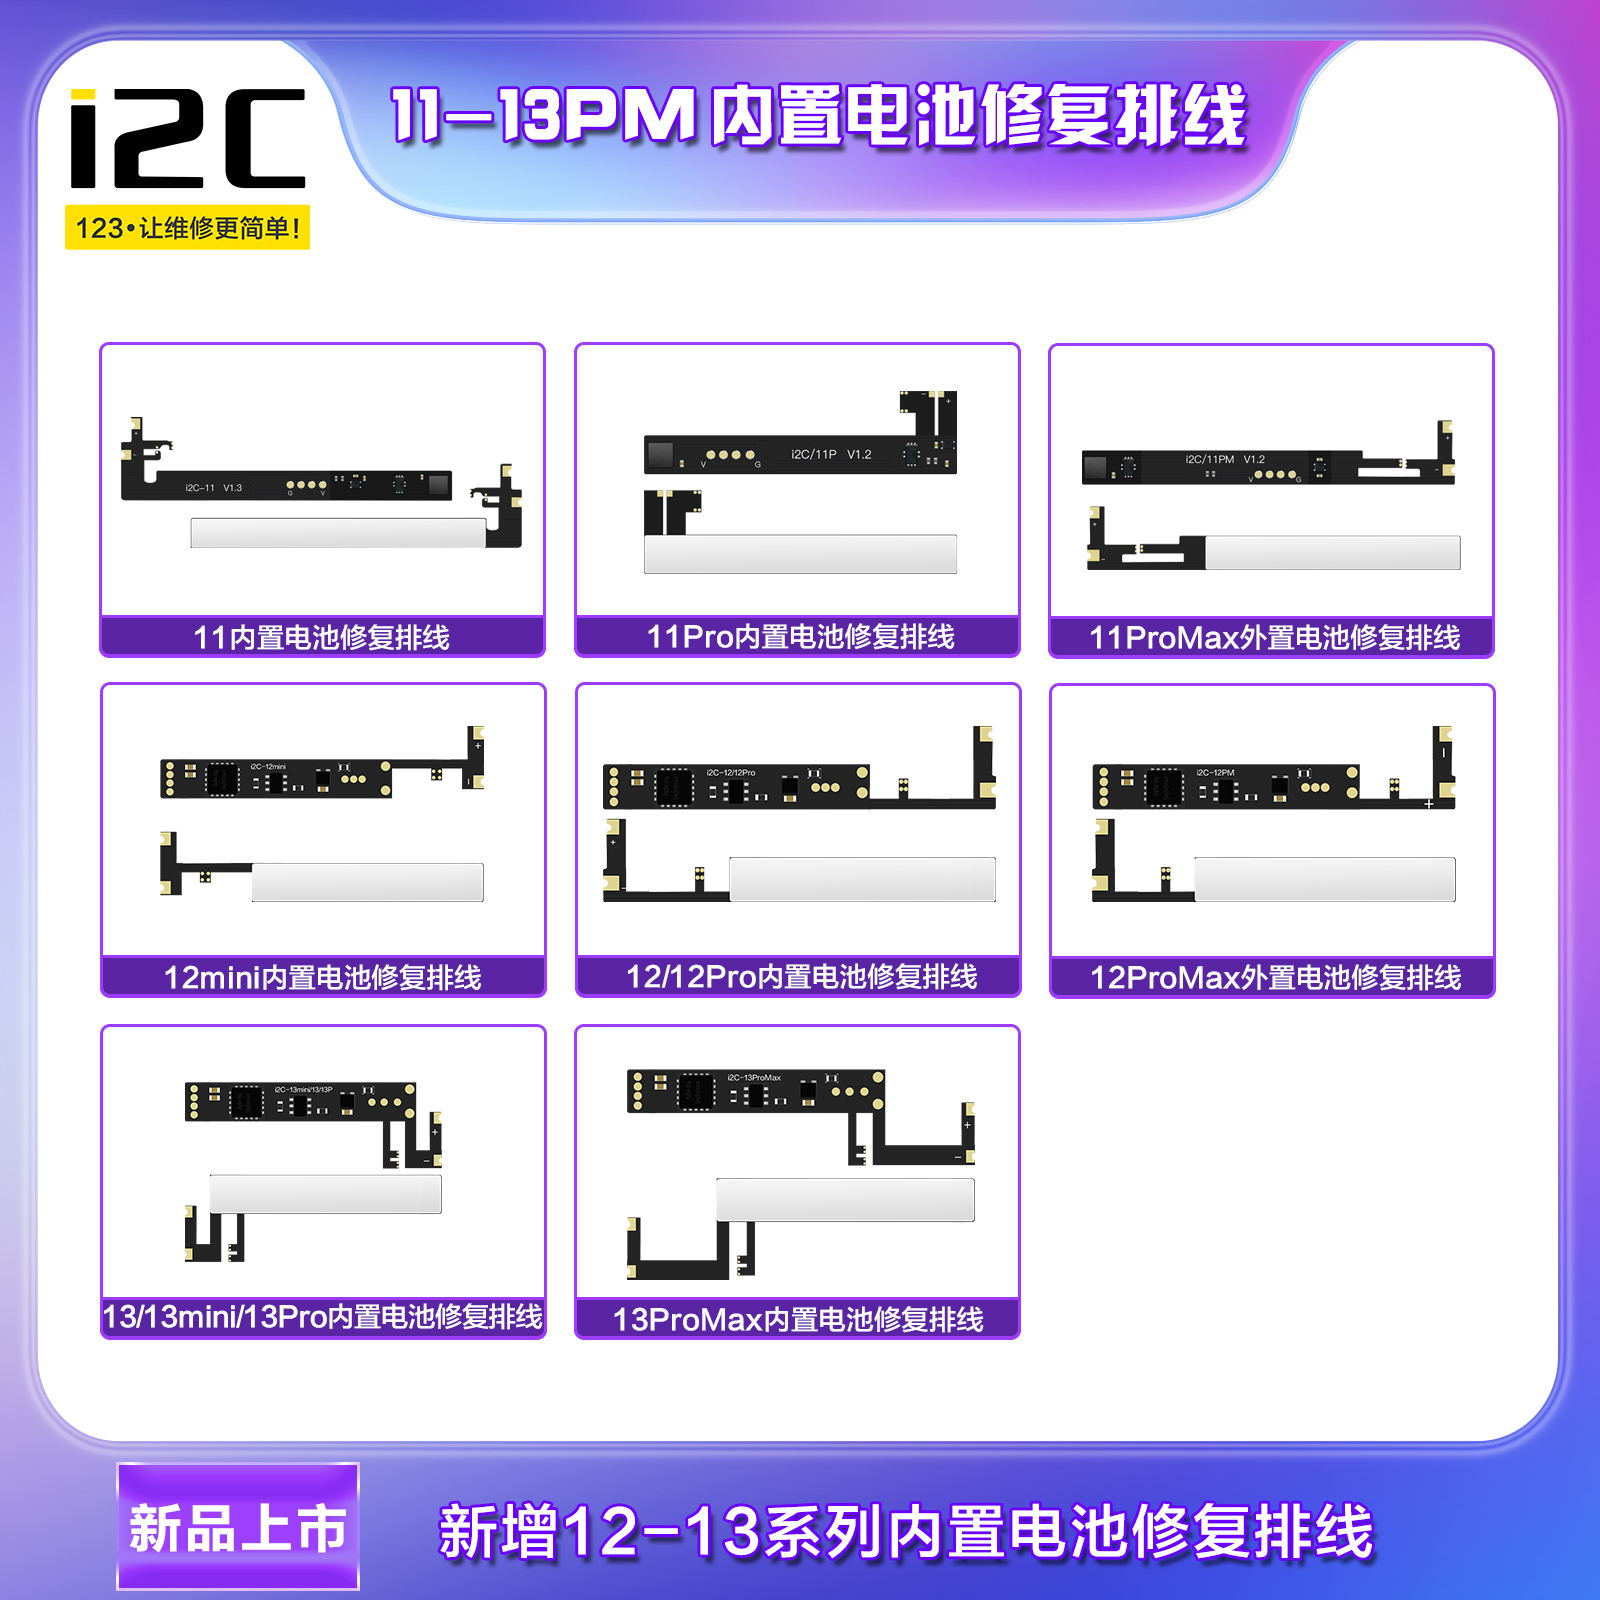 i2C 11-13PM built-in battery repair cable  Support Battery repair instrument BR-13(图1)